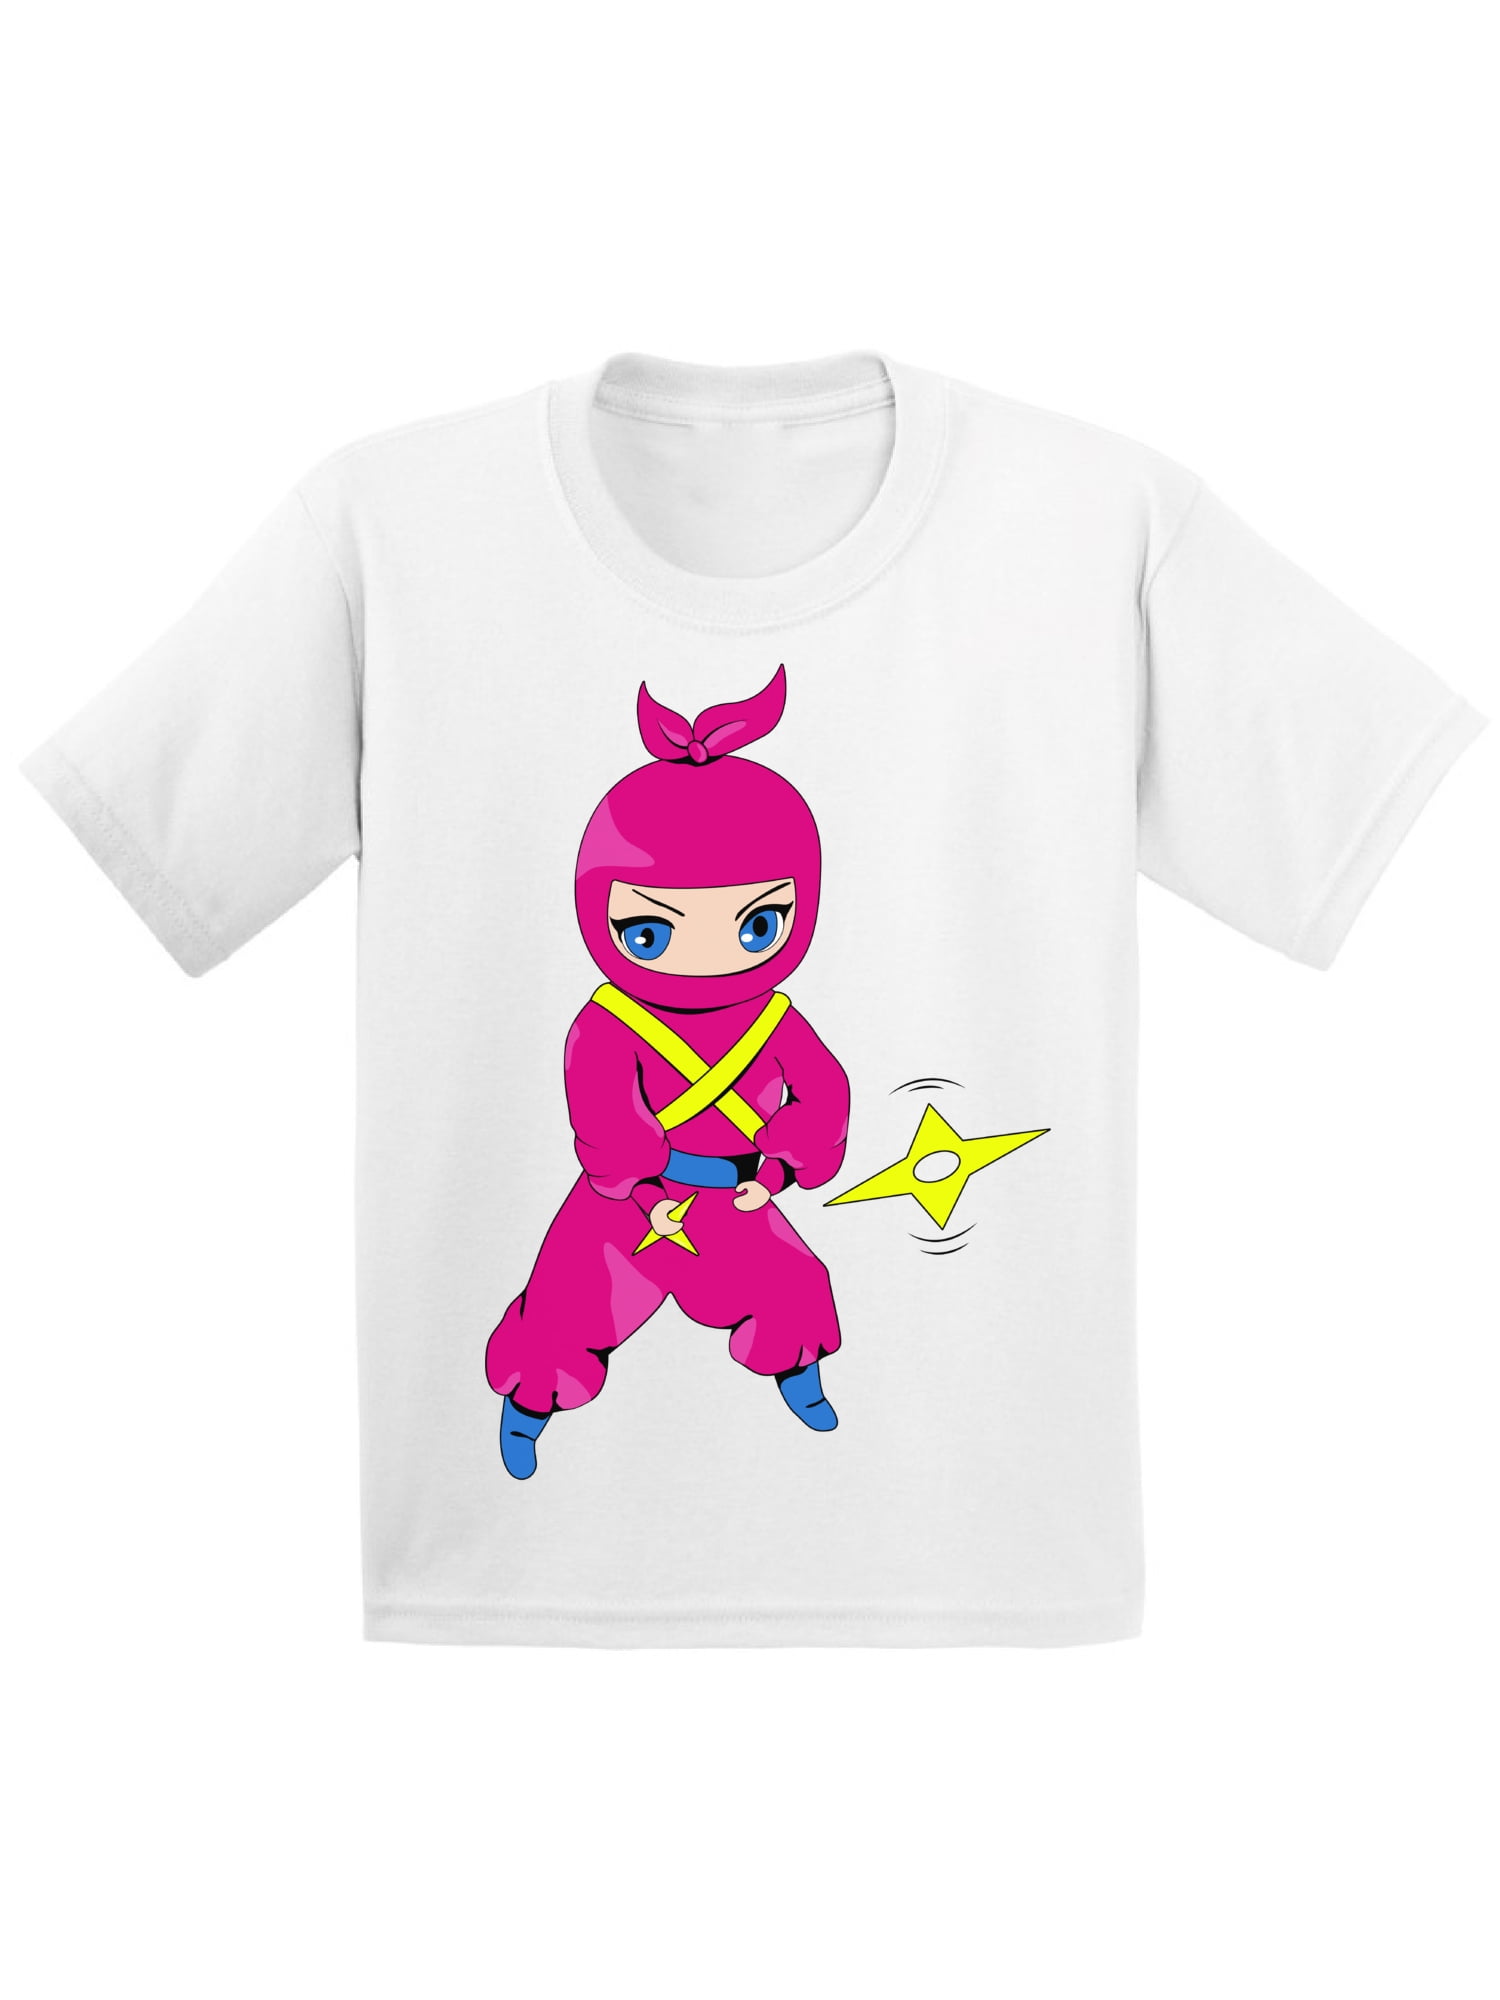 XS-5XL Mens Ask Me About My Ninja Disguise Flip T Shirt Funny Costume  Graphic Men's cotton T-Shirt Humor Gift Women Top Tee